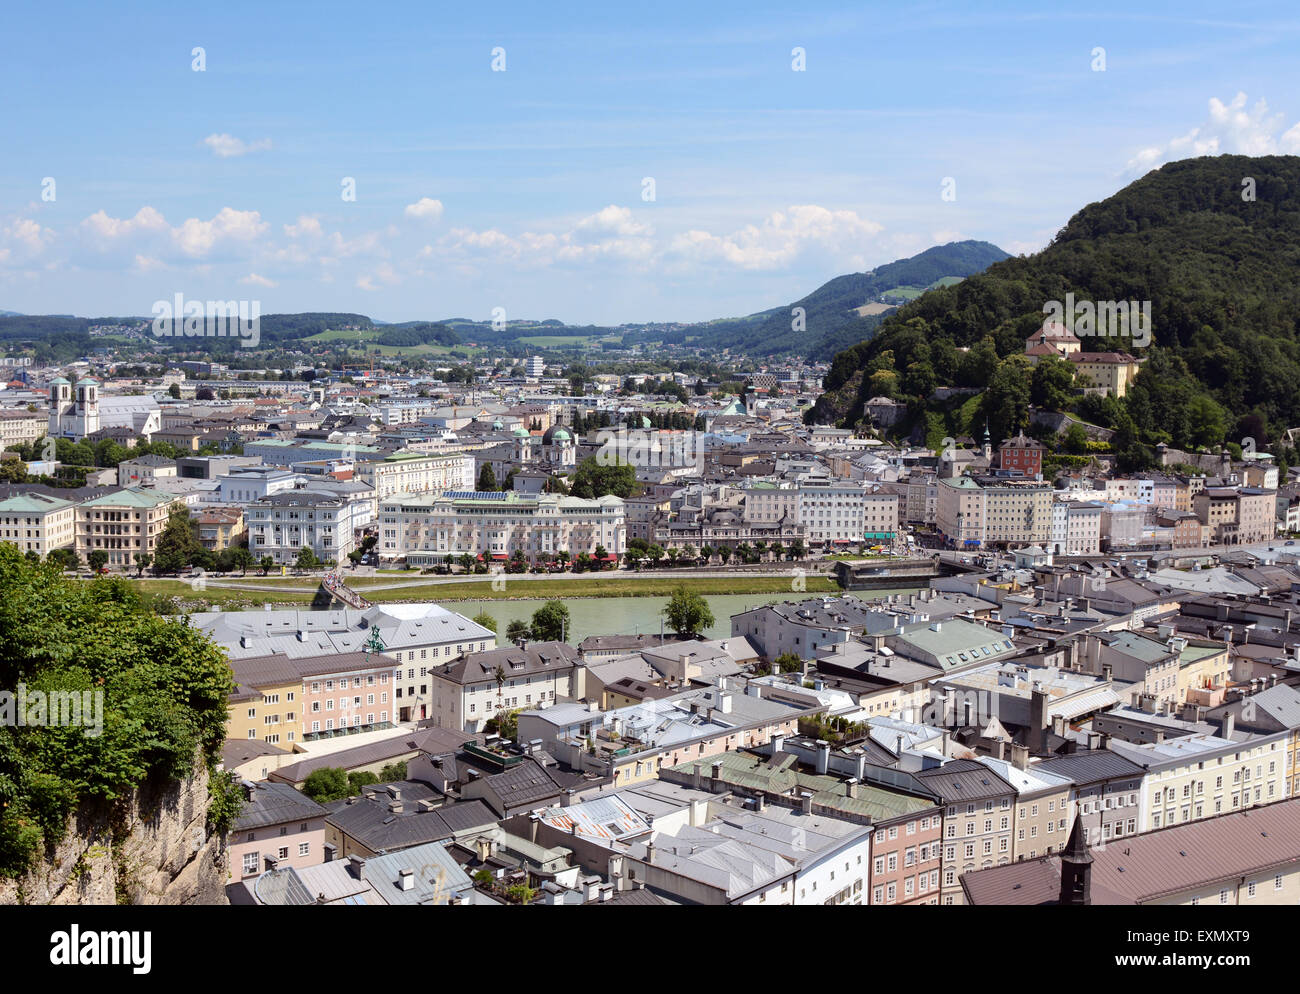 View across the European city of Salzburg in Austria. Looking east over ...